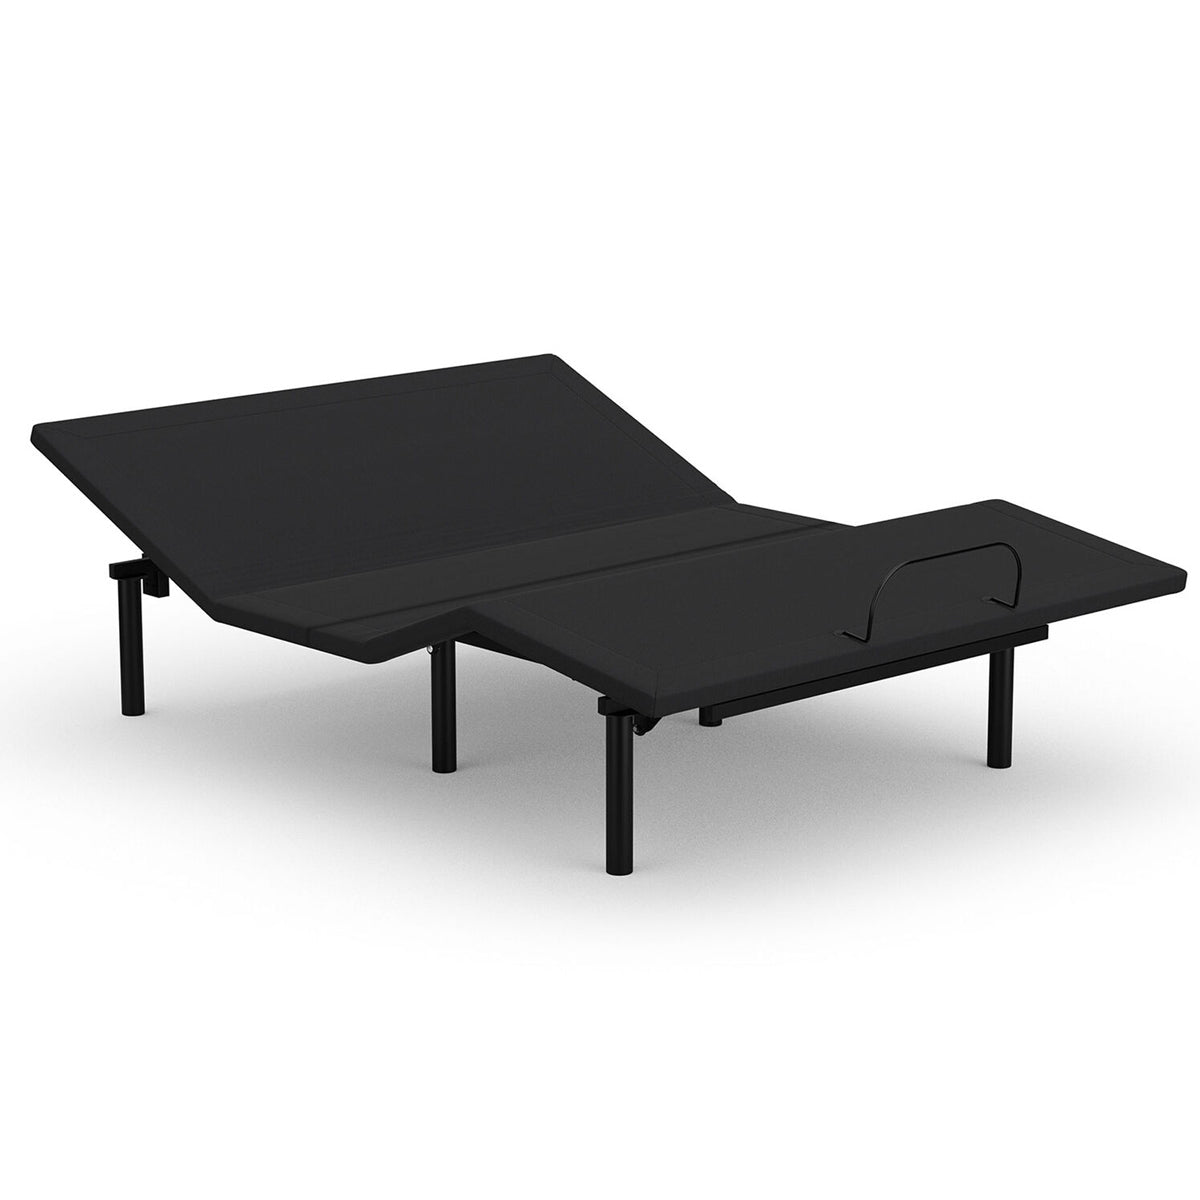 Shop by Price | Good Adjustable Beds